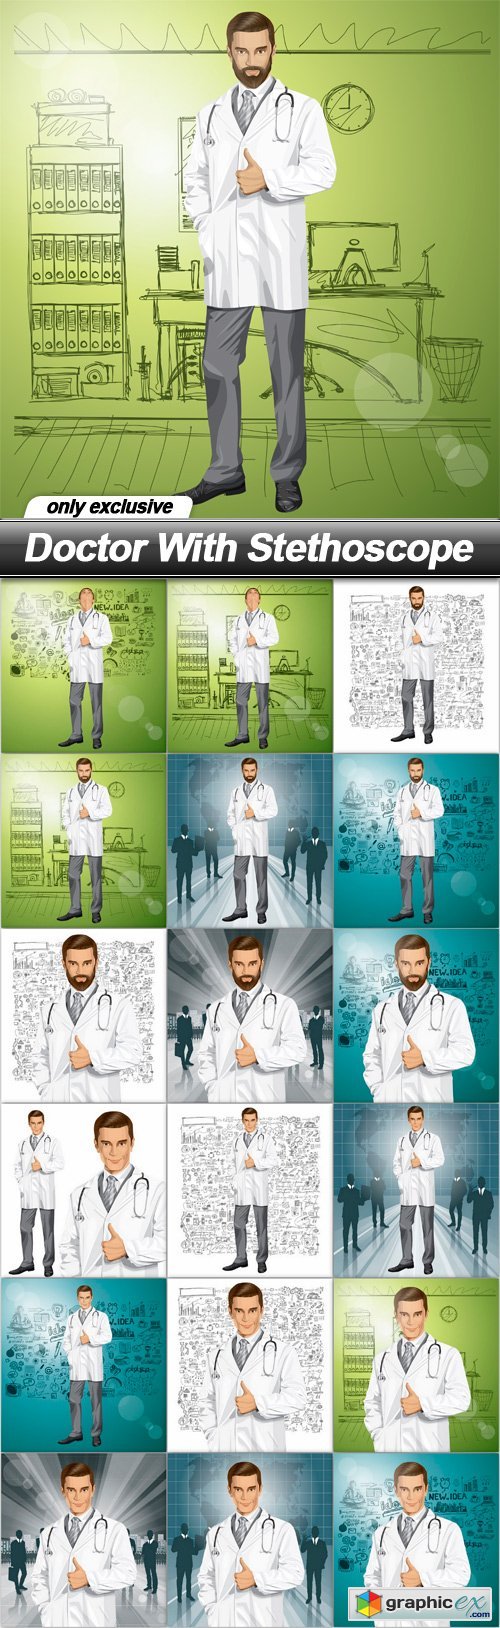 Doctor With Stethoscope - 18 EPS